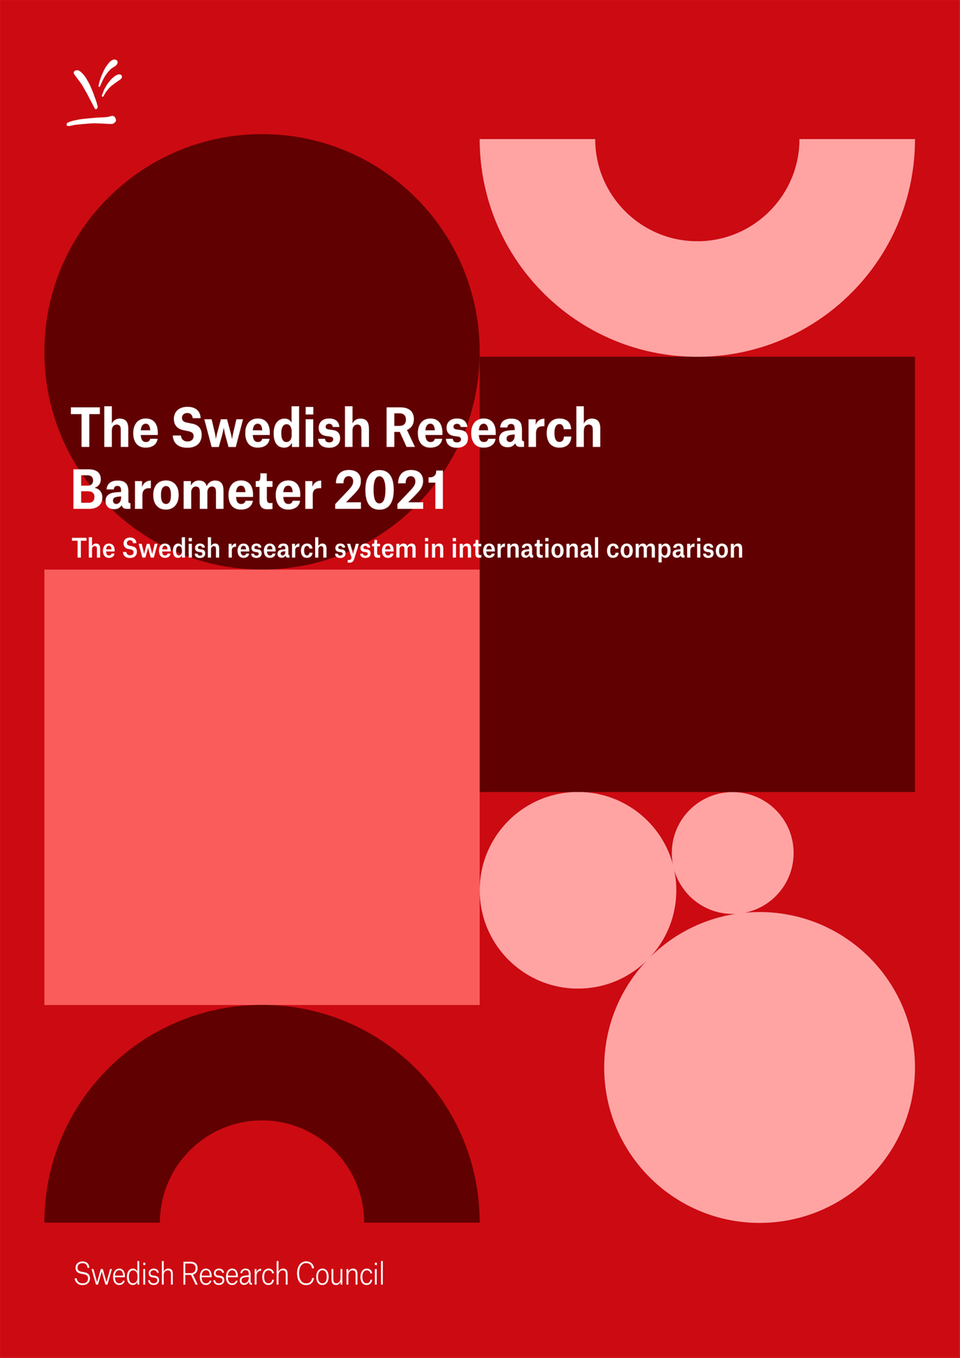 swedish research council